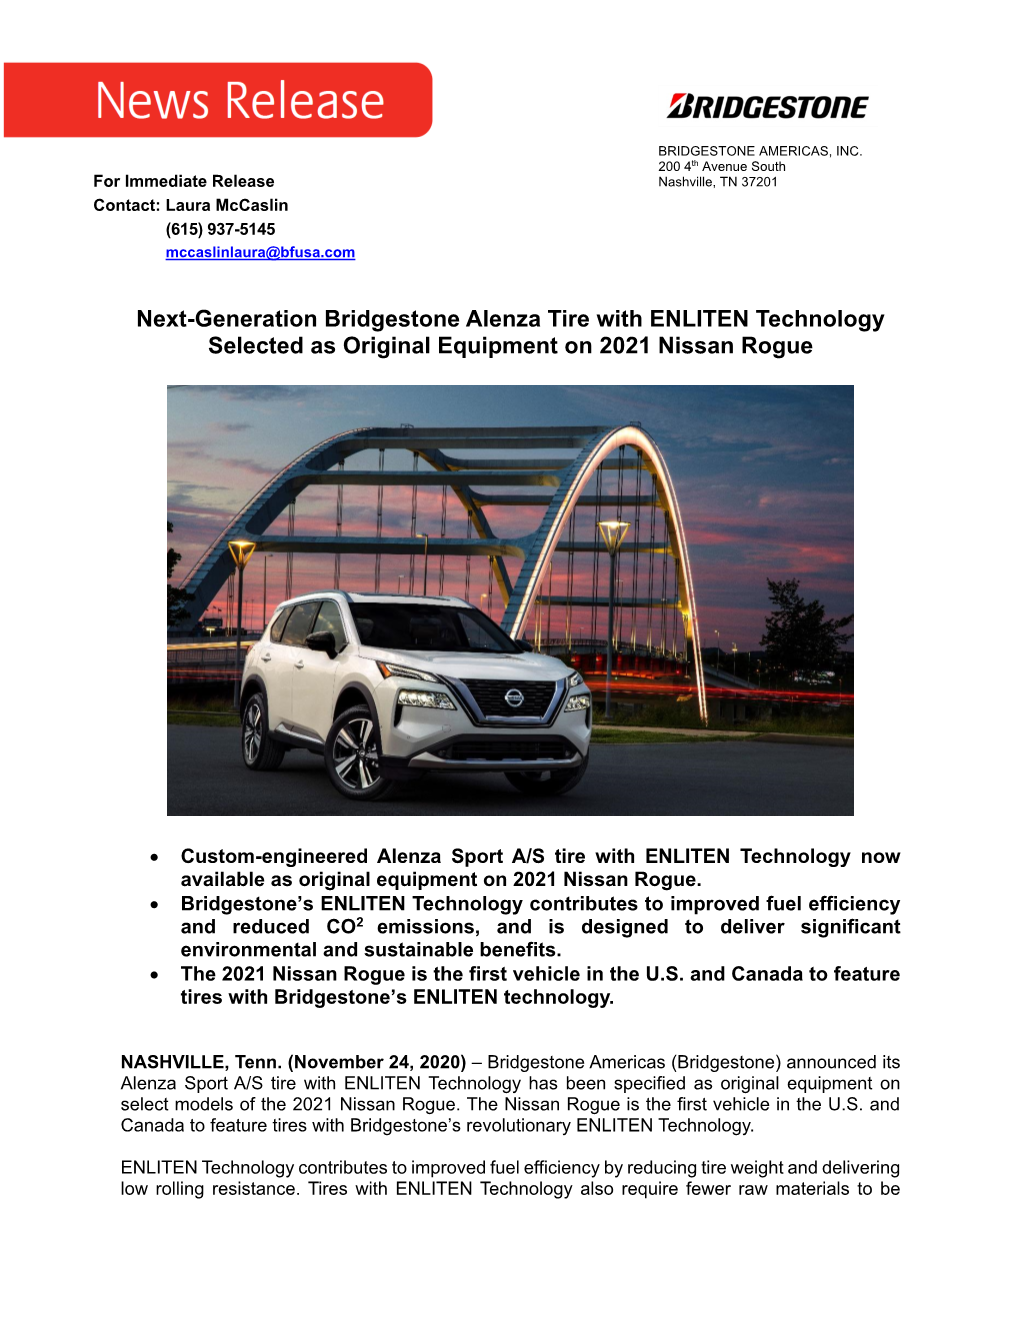 112420 Alenza Tire Selected As OE for 2021 Nissan Rogue